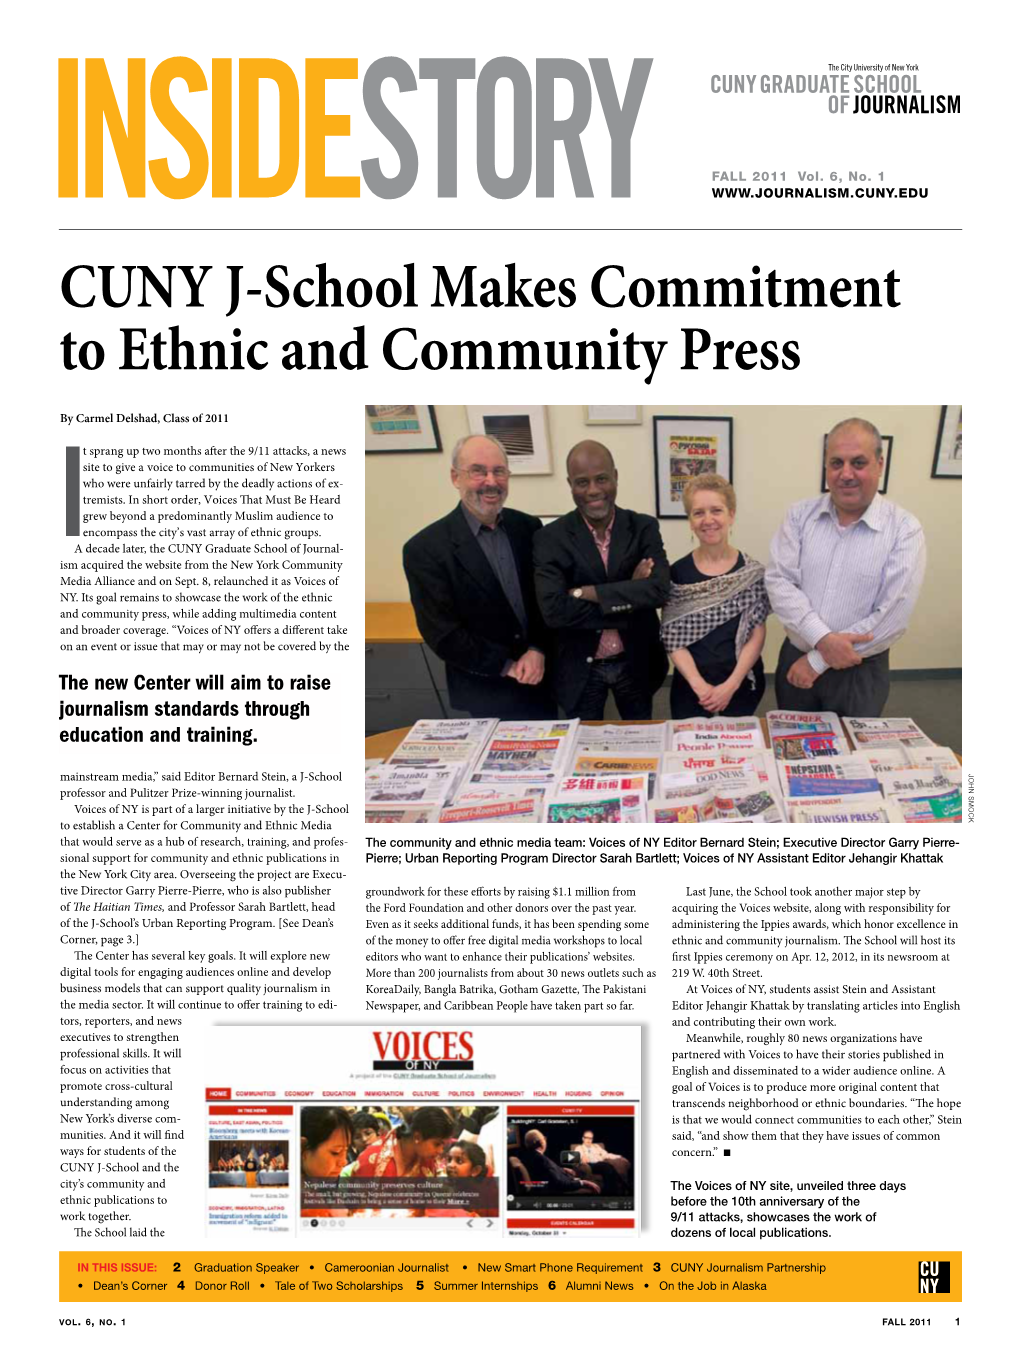 CUNY J-School Makes Commitment to Ethnic and Community Press